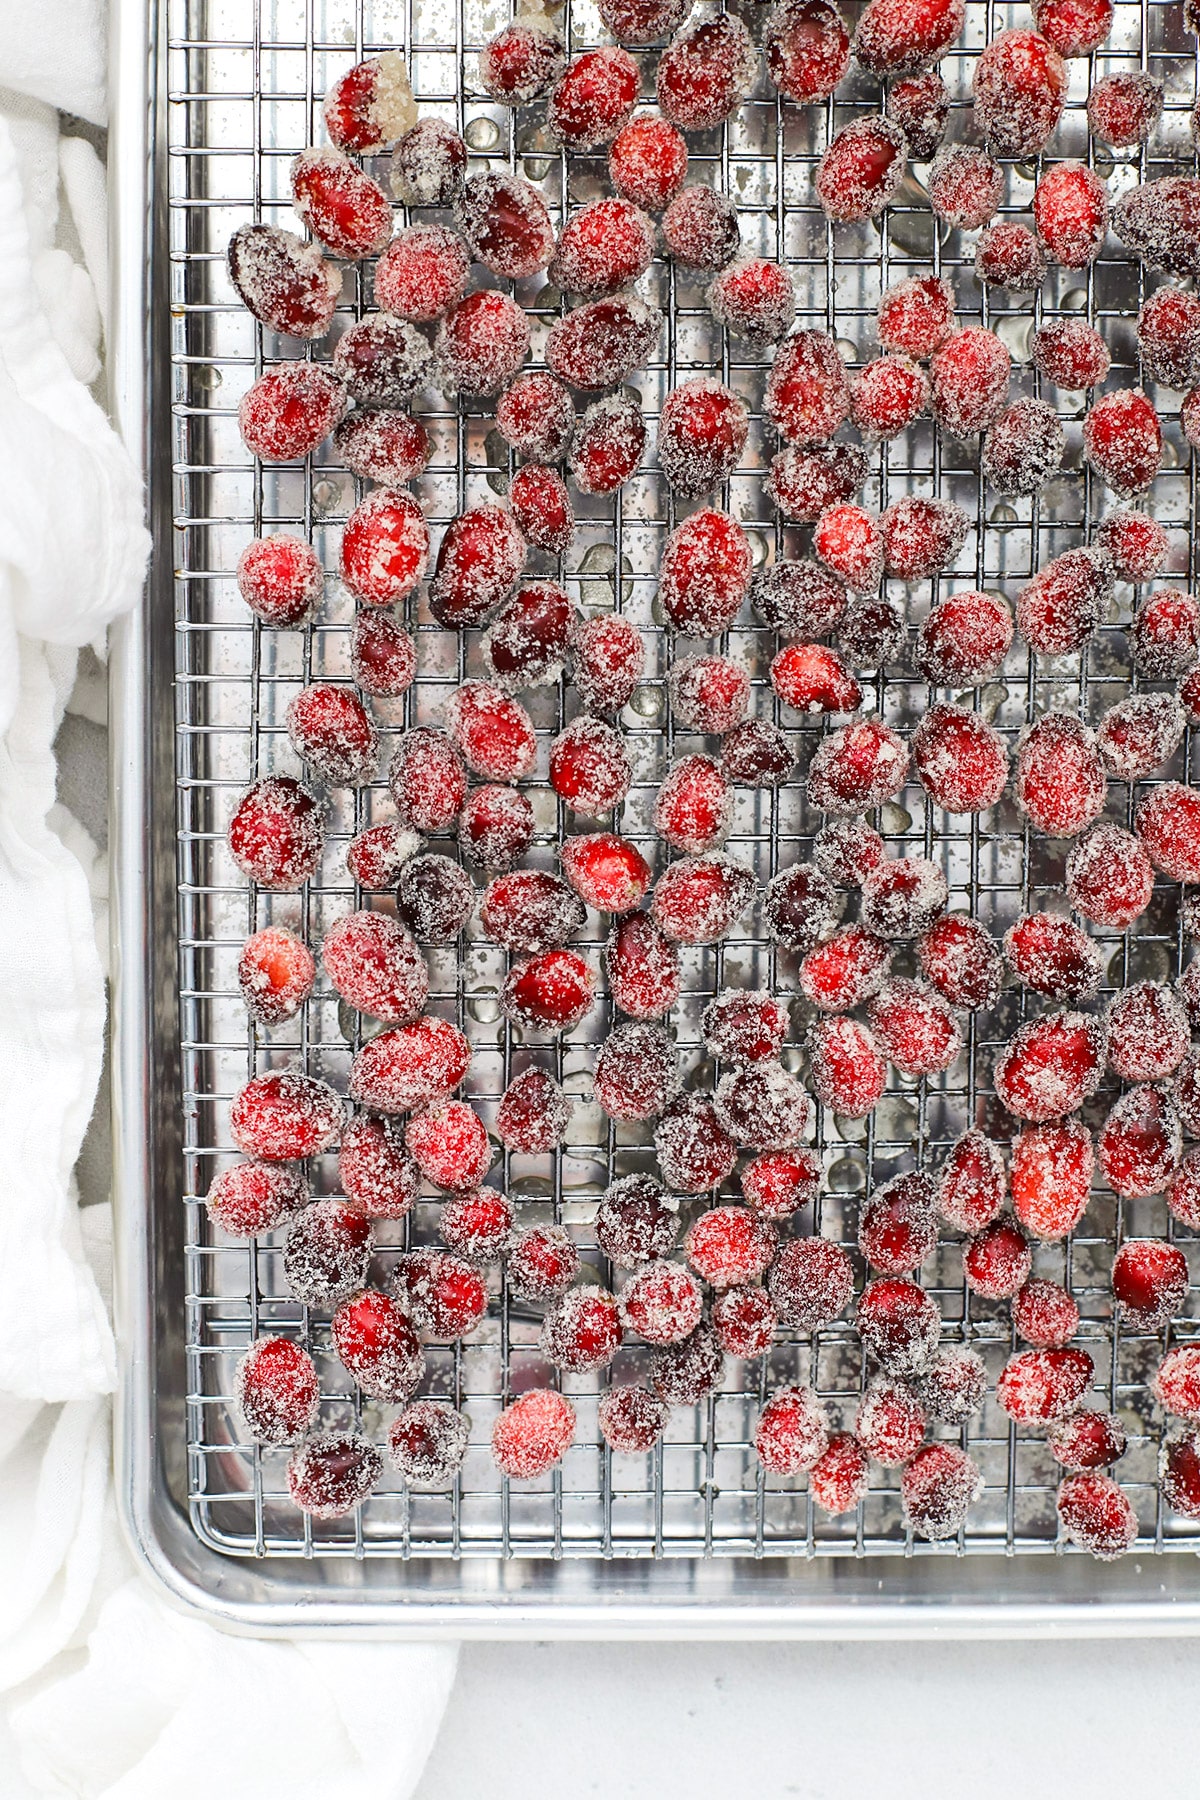 Sugar covered cranberries on a cooling rack